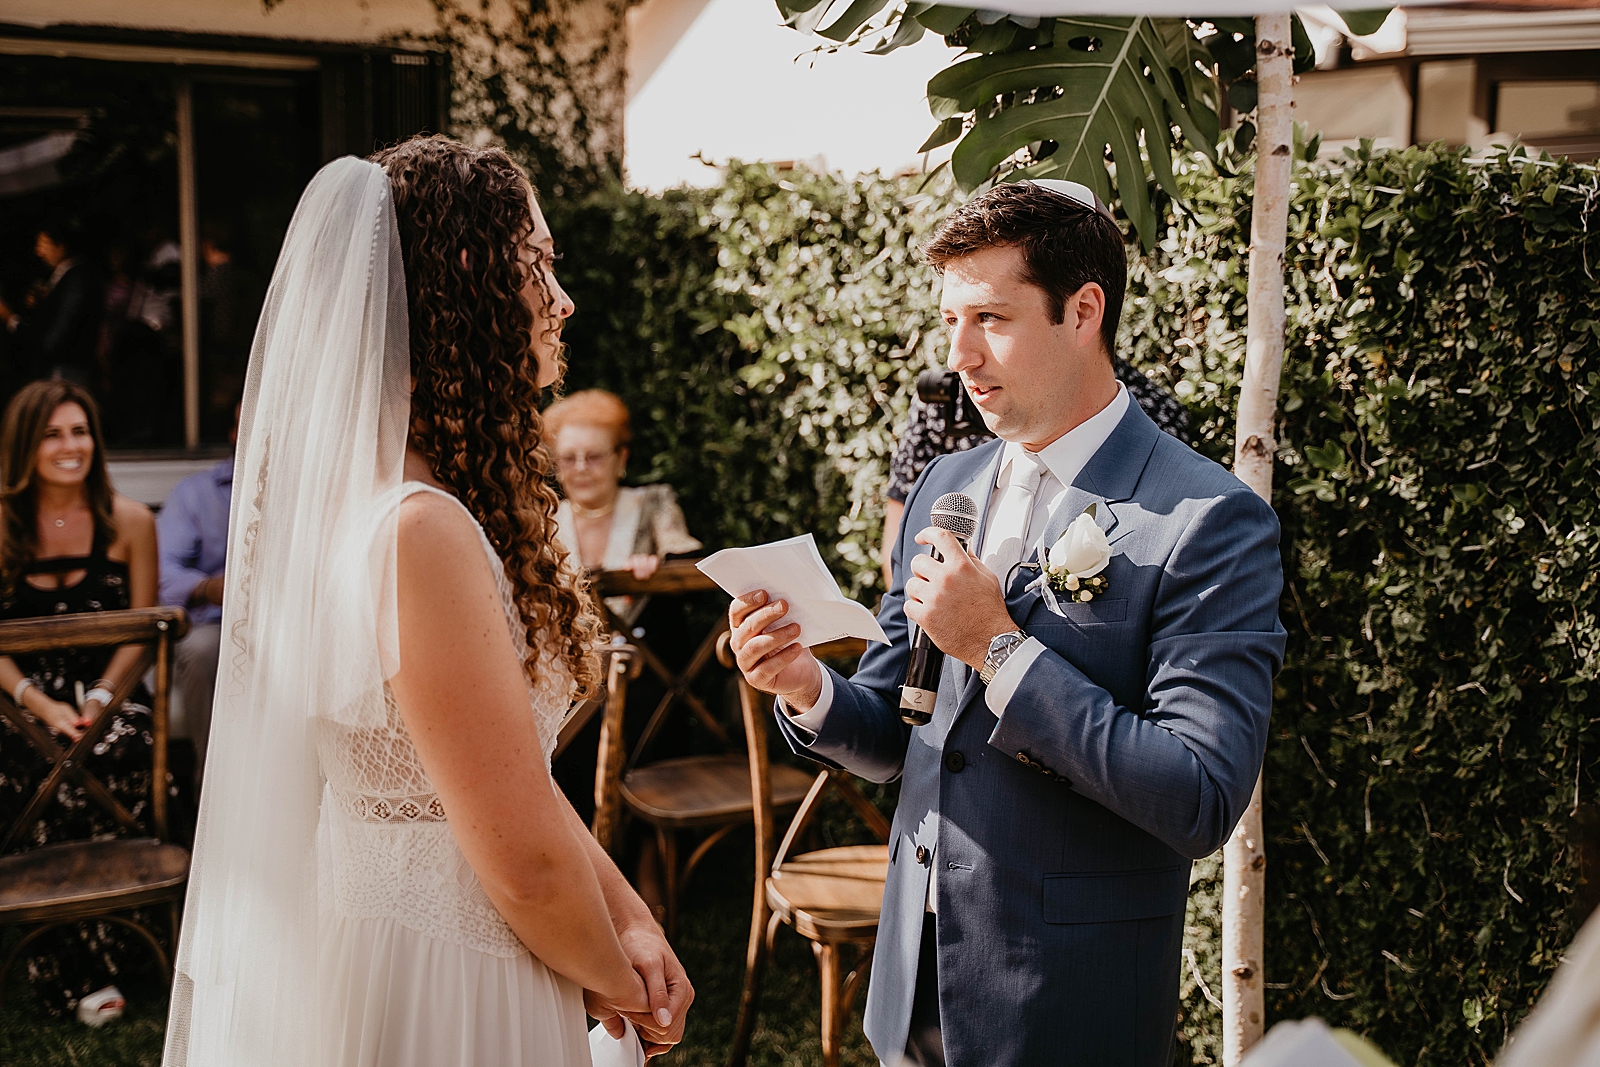 Groom telling his Ketubah to Bride during ceremony Intimate South Florida Wedding Photography captured by South Florida Wedding Photographer Krystal Capone Photography 